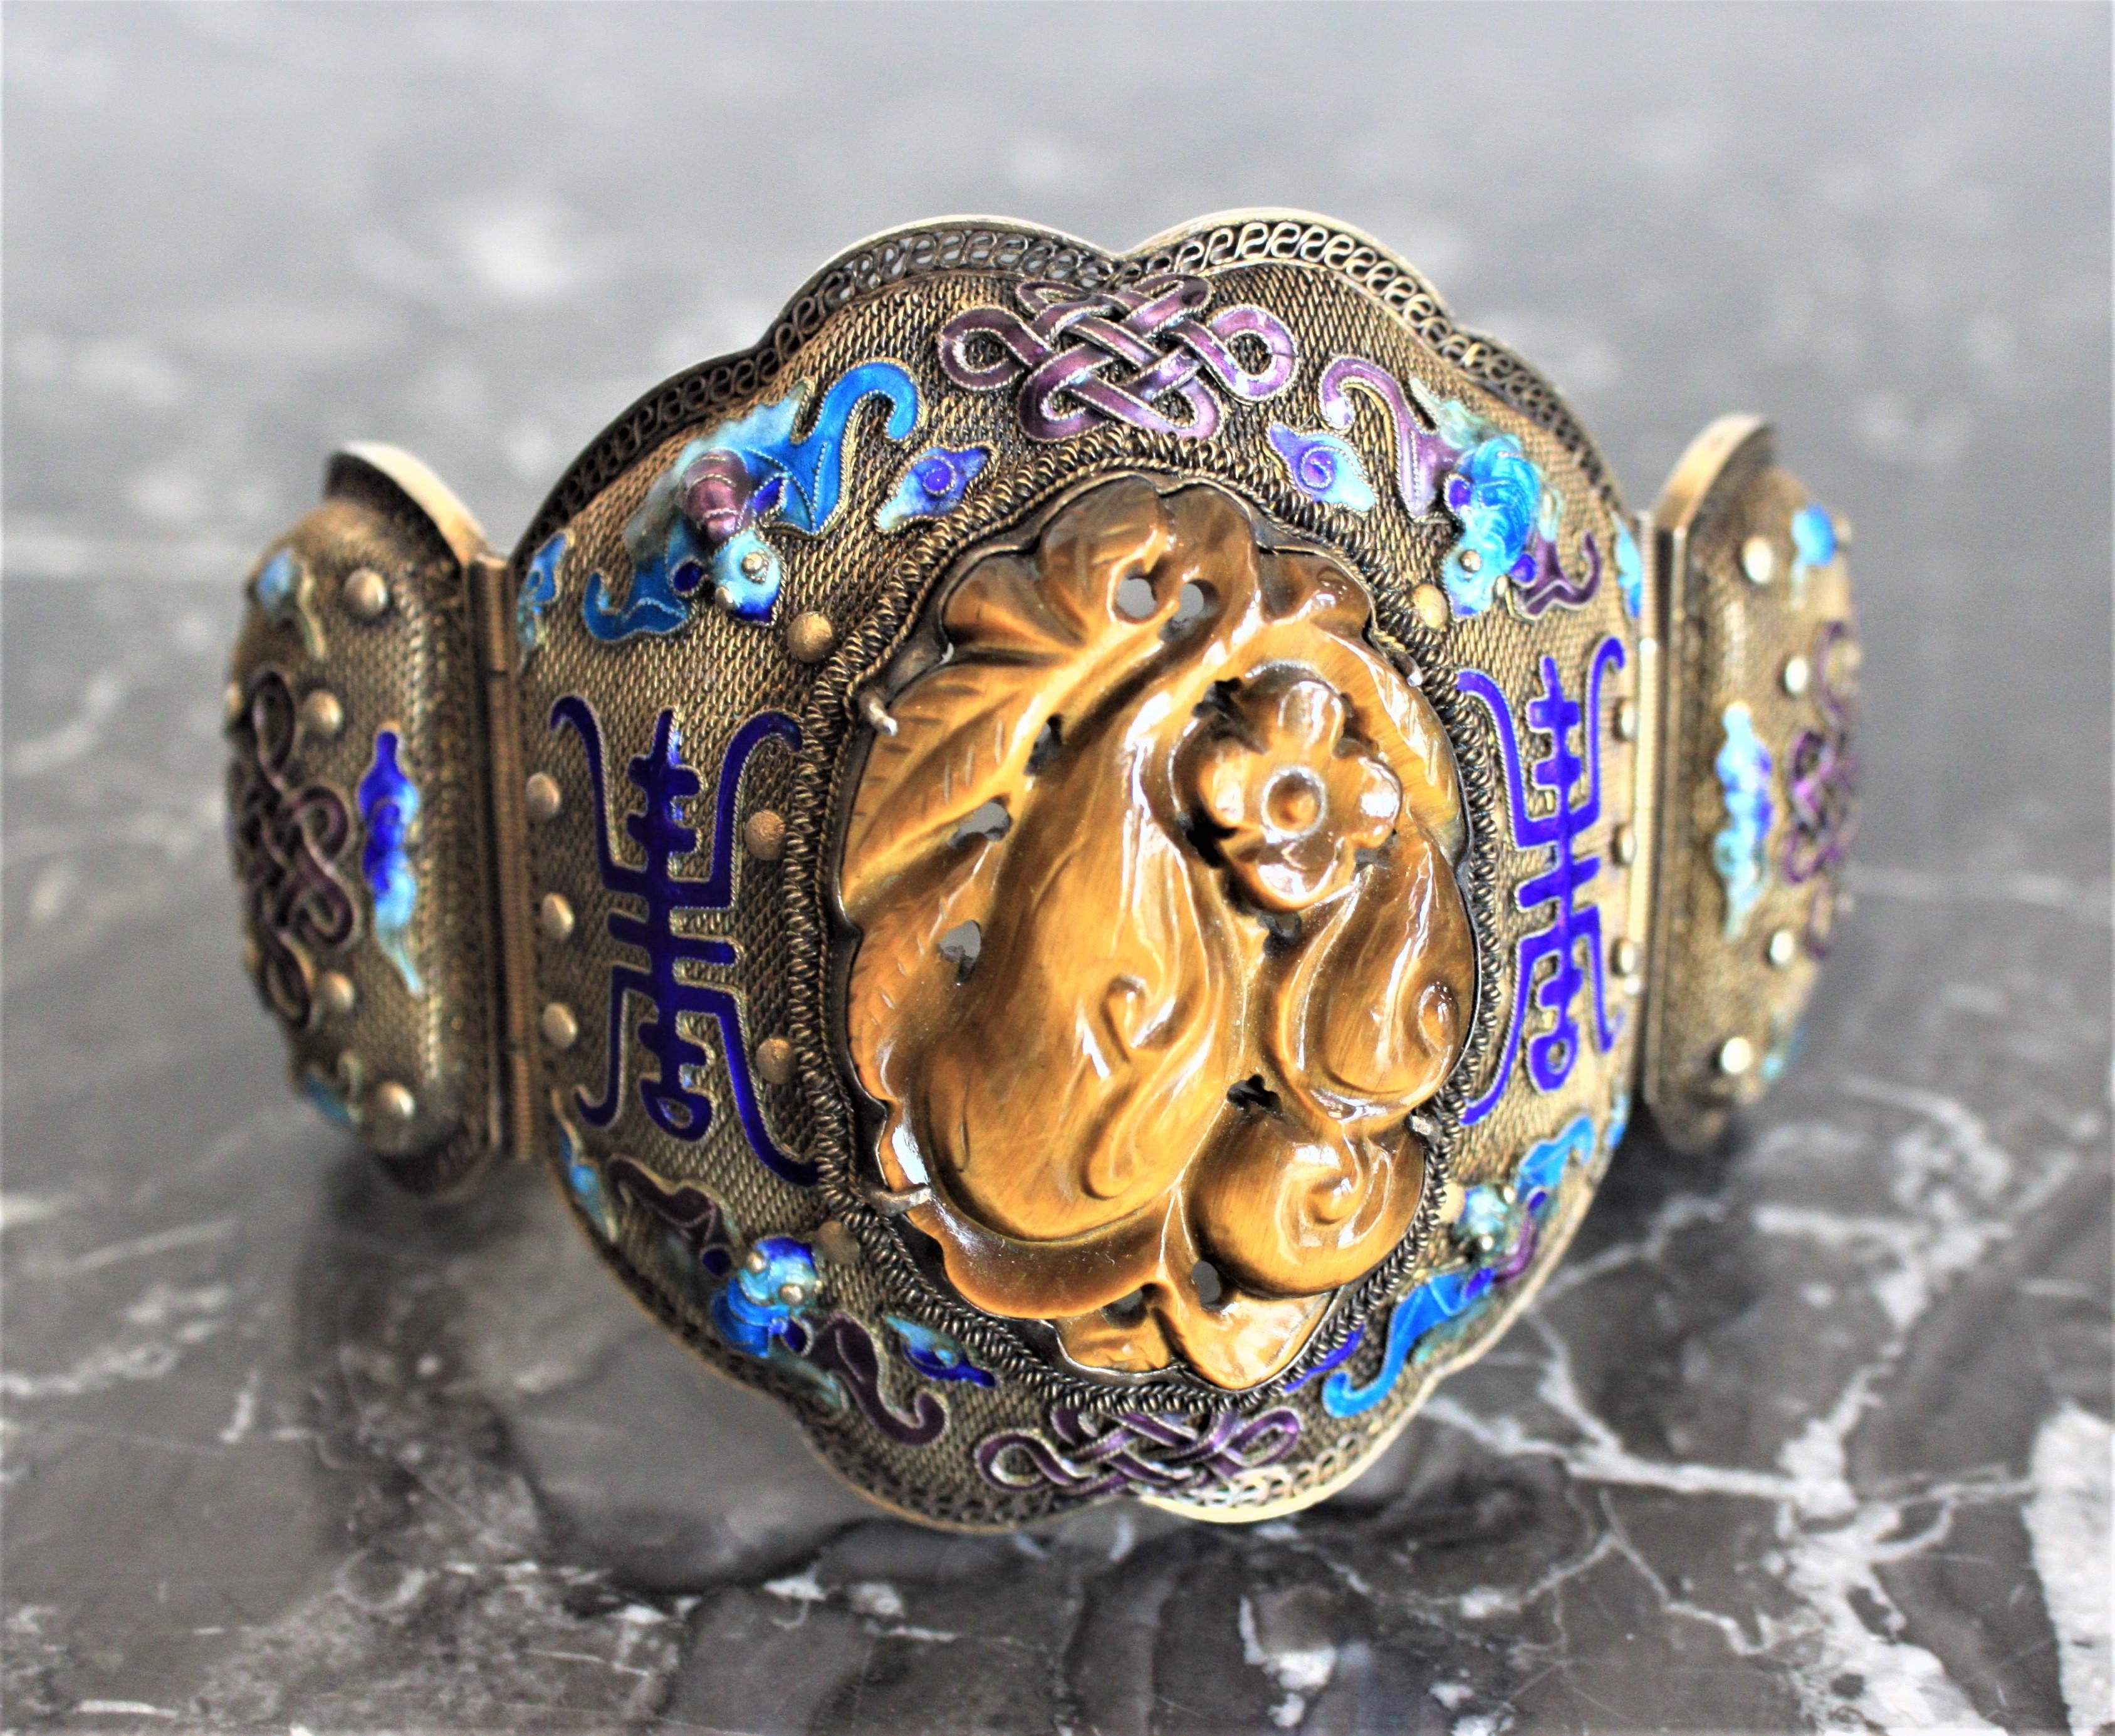 Dating from the late Qing Dynasty period, this very large and intricately constructed cuff bracelet is composed of three panels of a silver border completely filled in a very fine silver mesh with cobalt blue and turquoise enamel decoration. The